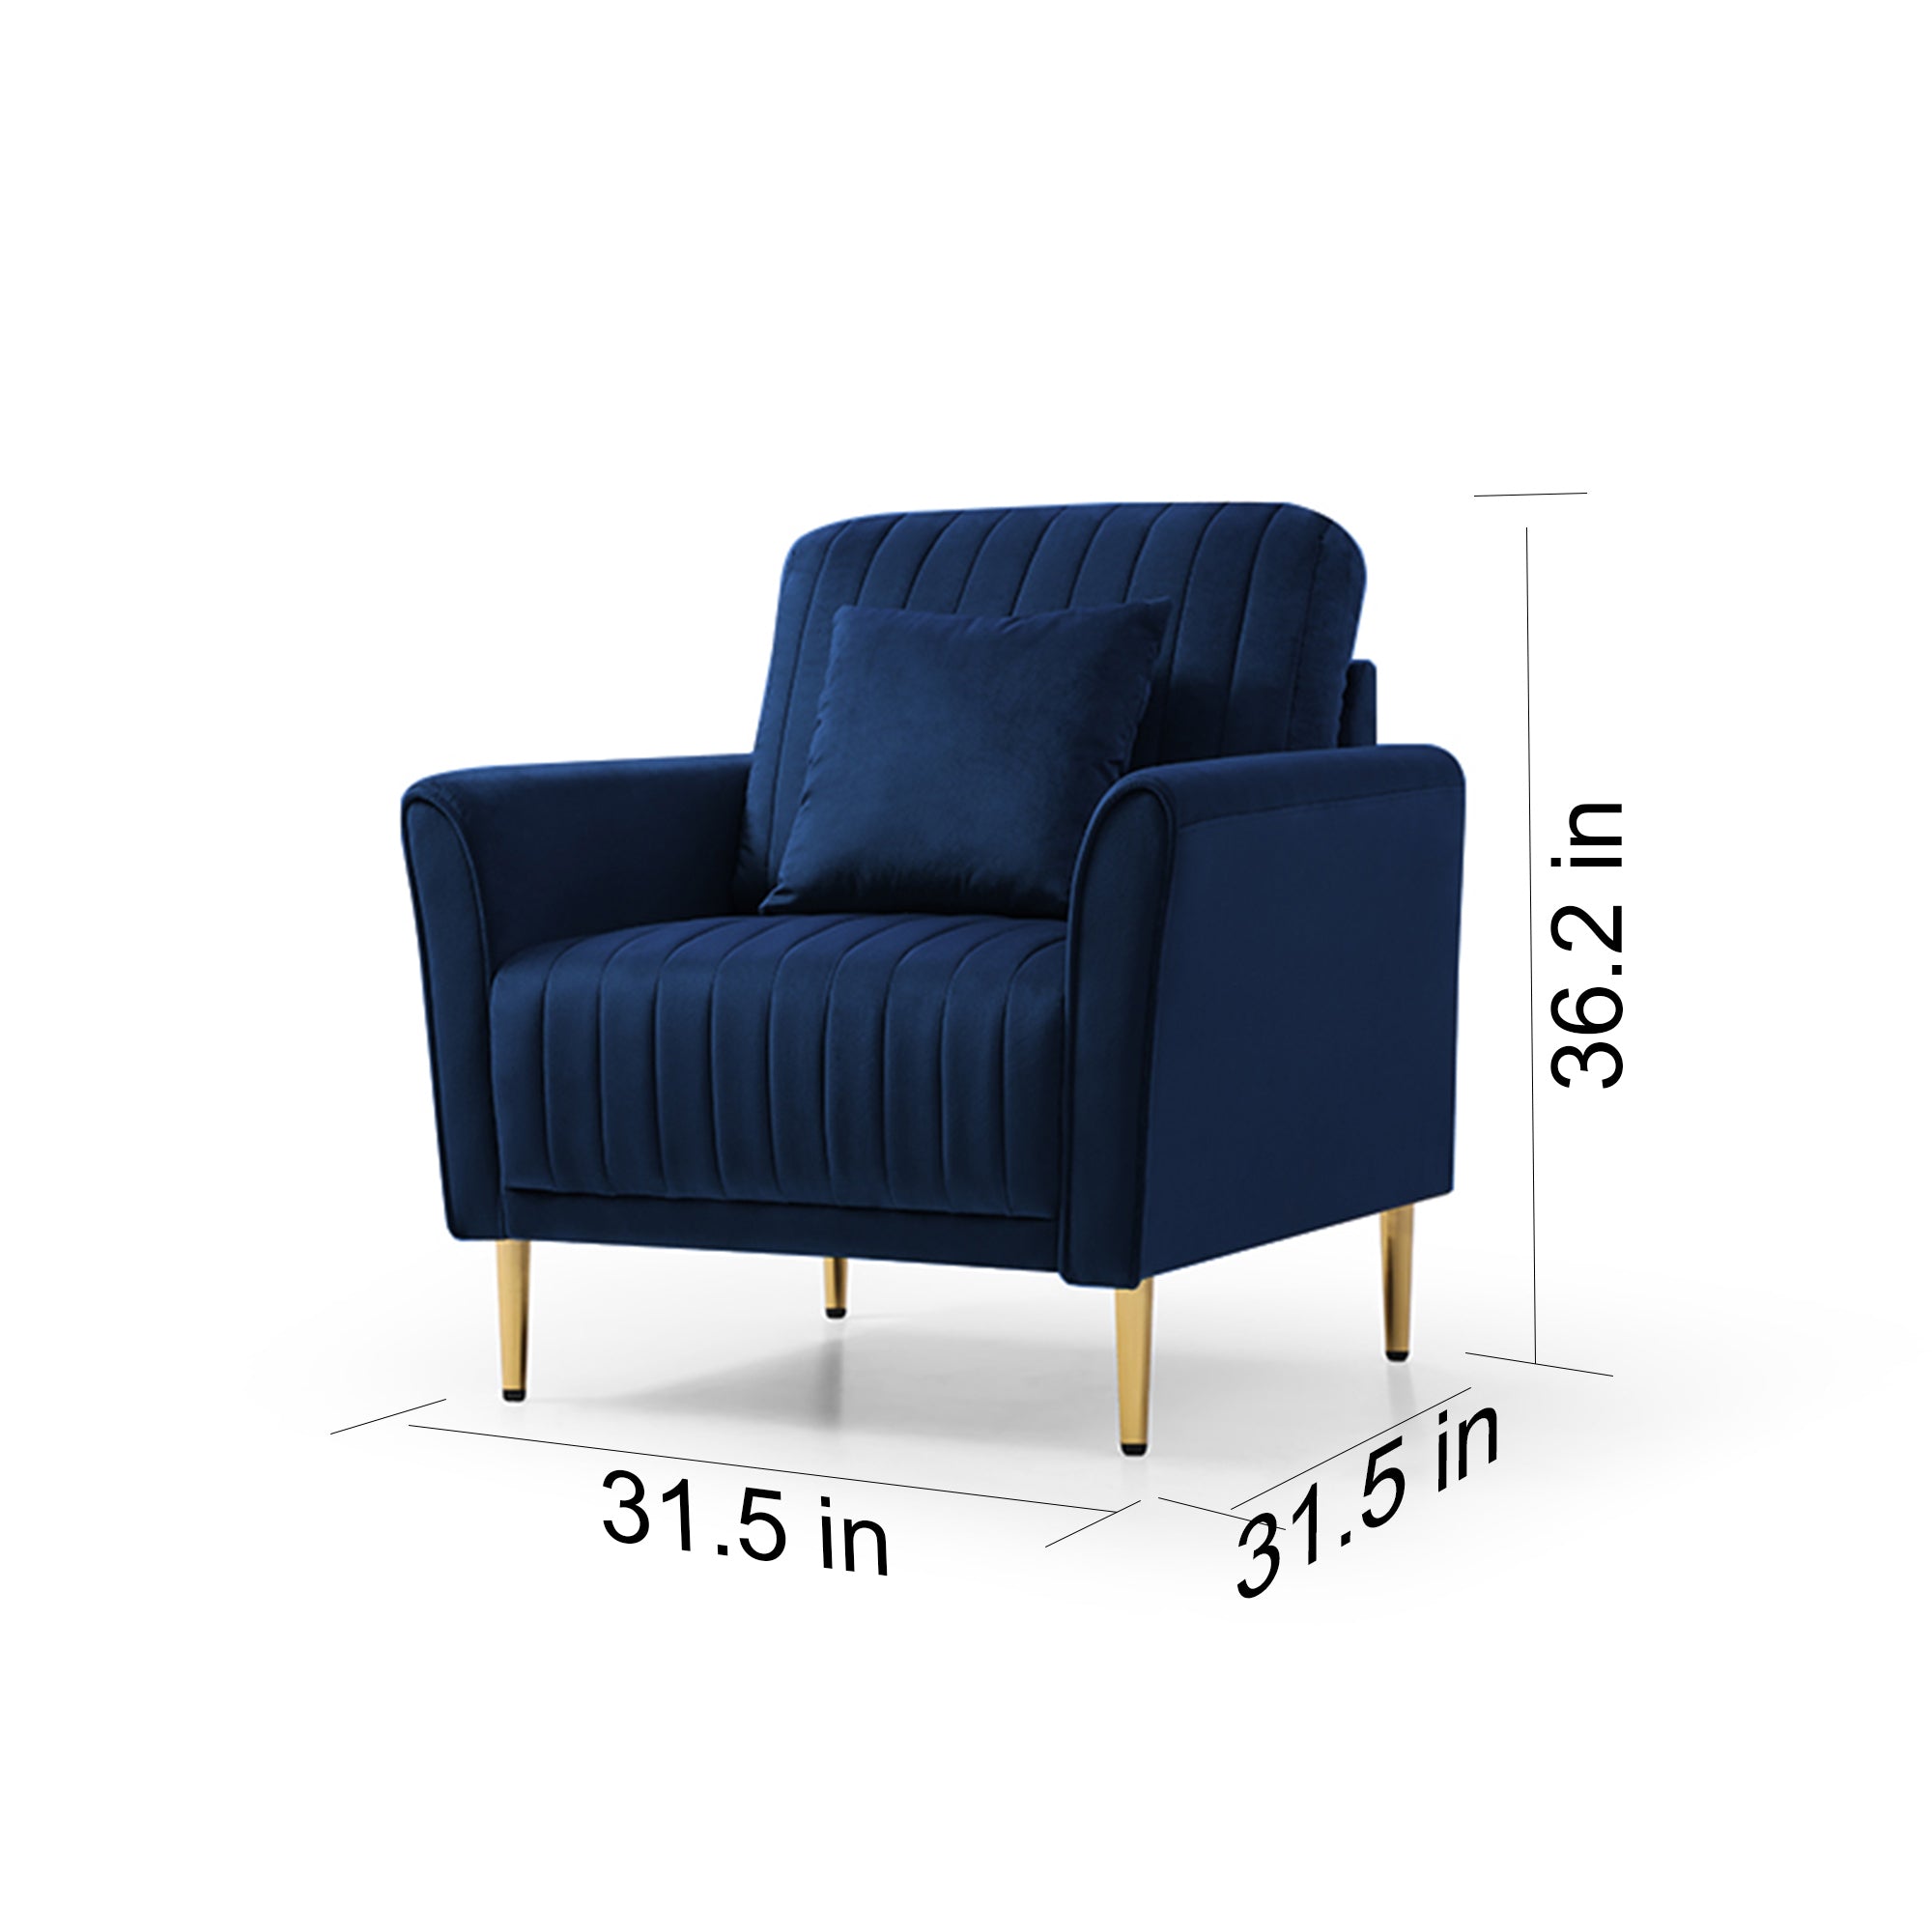 Velvet Accent Chair Round Arm Chair with Gold Legs, Upholstered Single Sofa for Living Room Bedroom, Navy Blue with 1 Throw Pillow